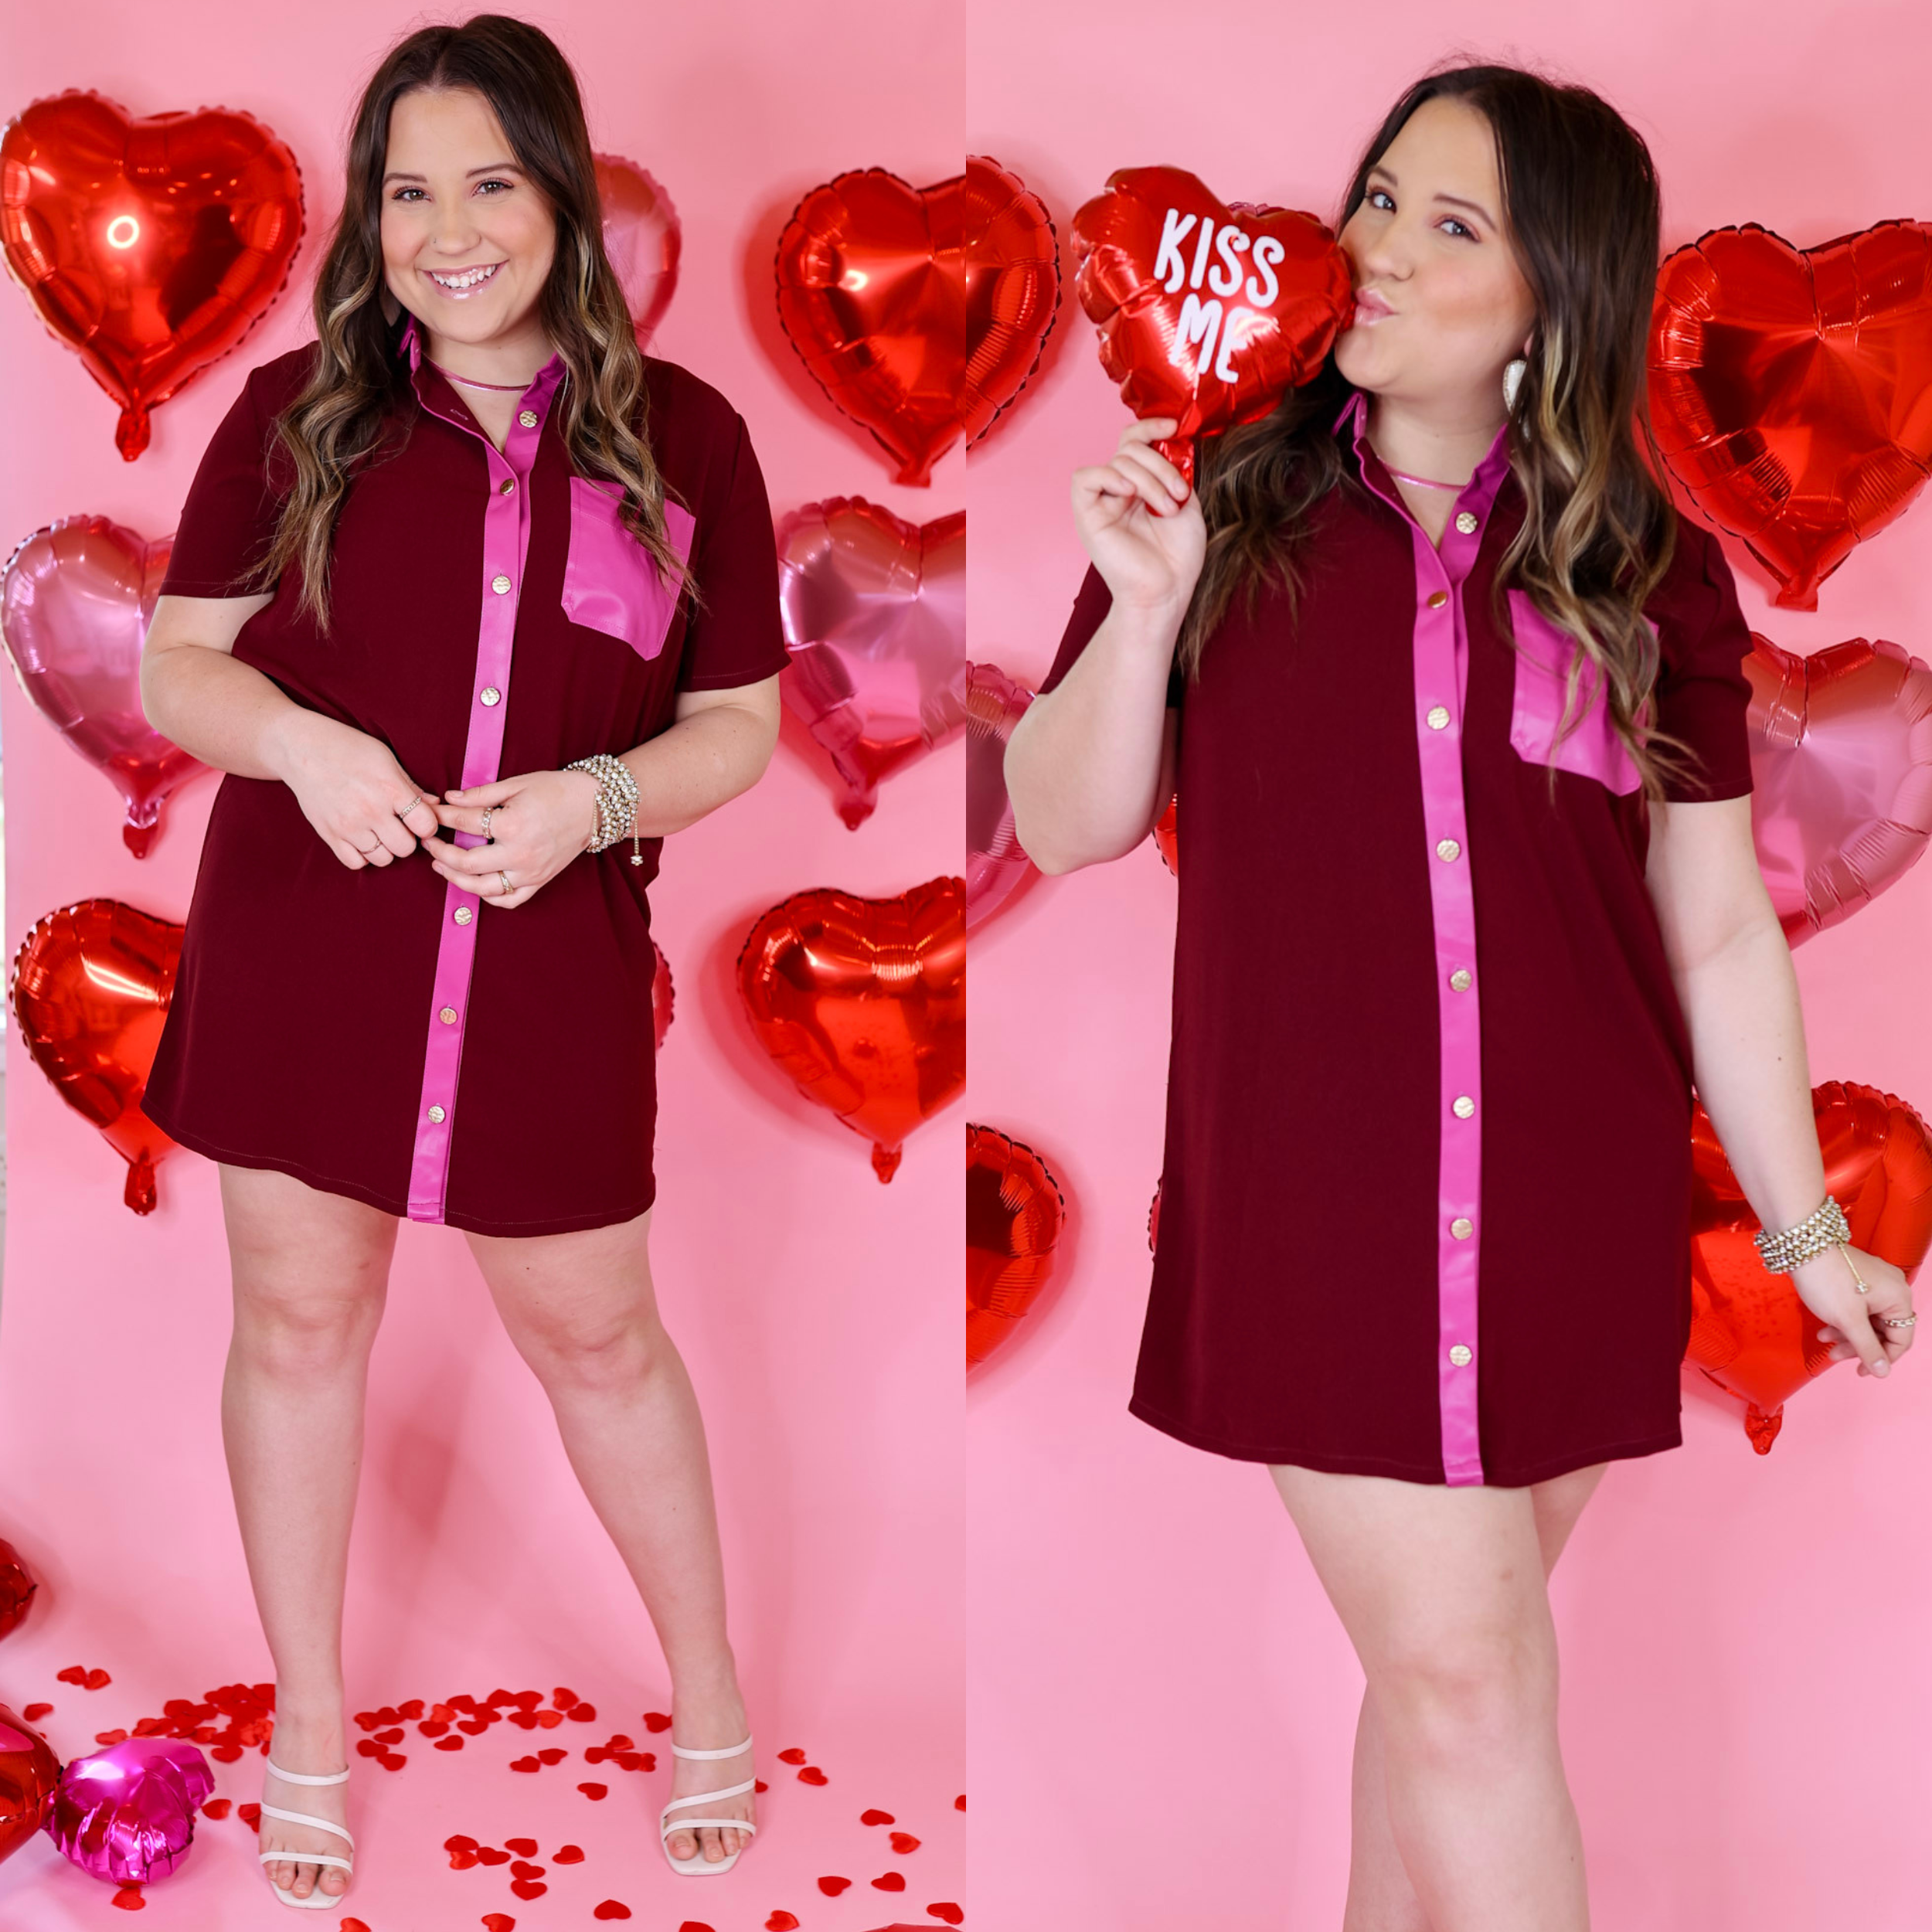 Model has a button down, feaux leather trim dress with a front pocket in maroon and a hot pink for the trim and pocket. Model has this dress paired with white heels and silver jewelry. Background is a light pink with red balloon hearts. 